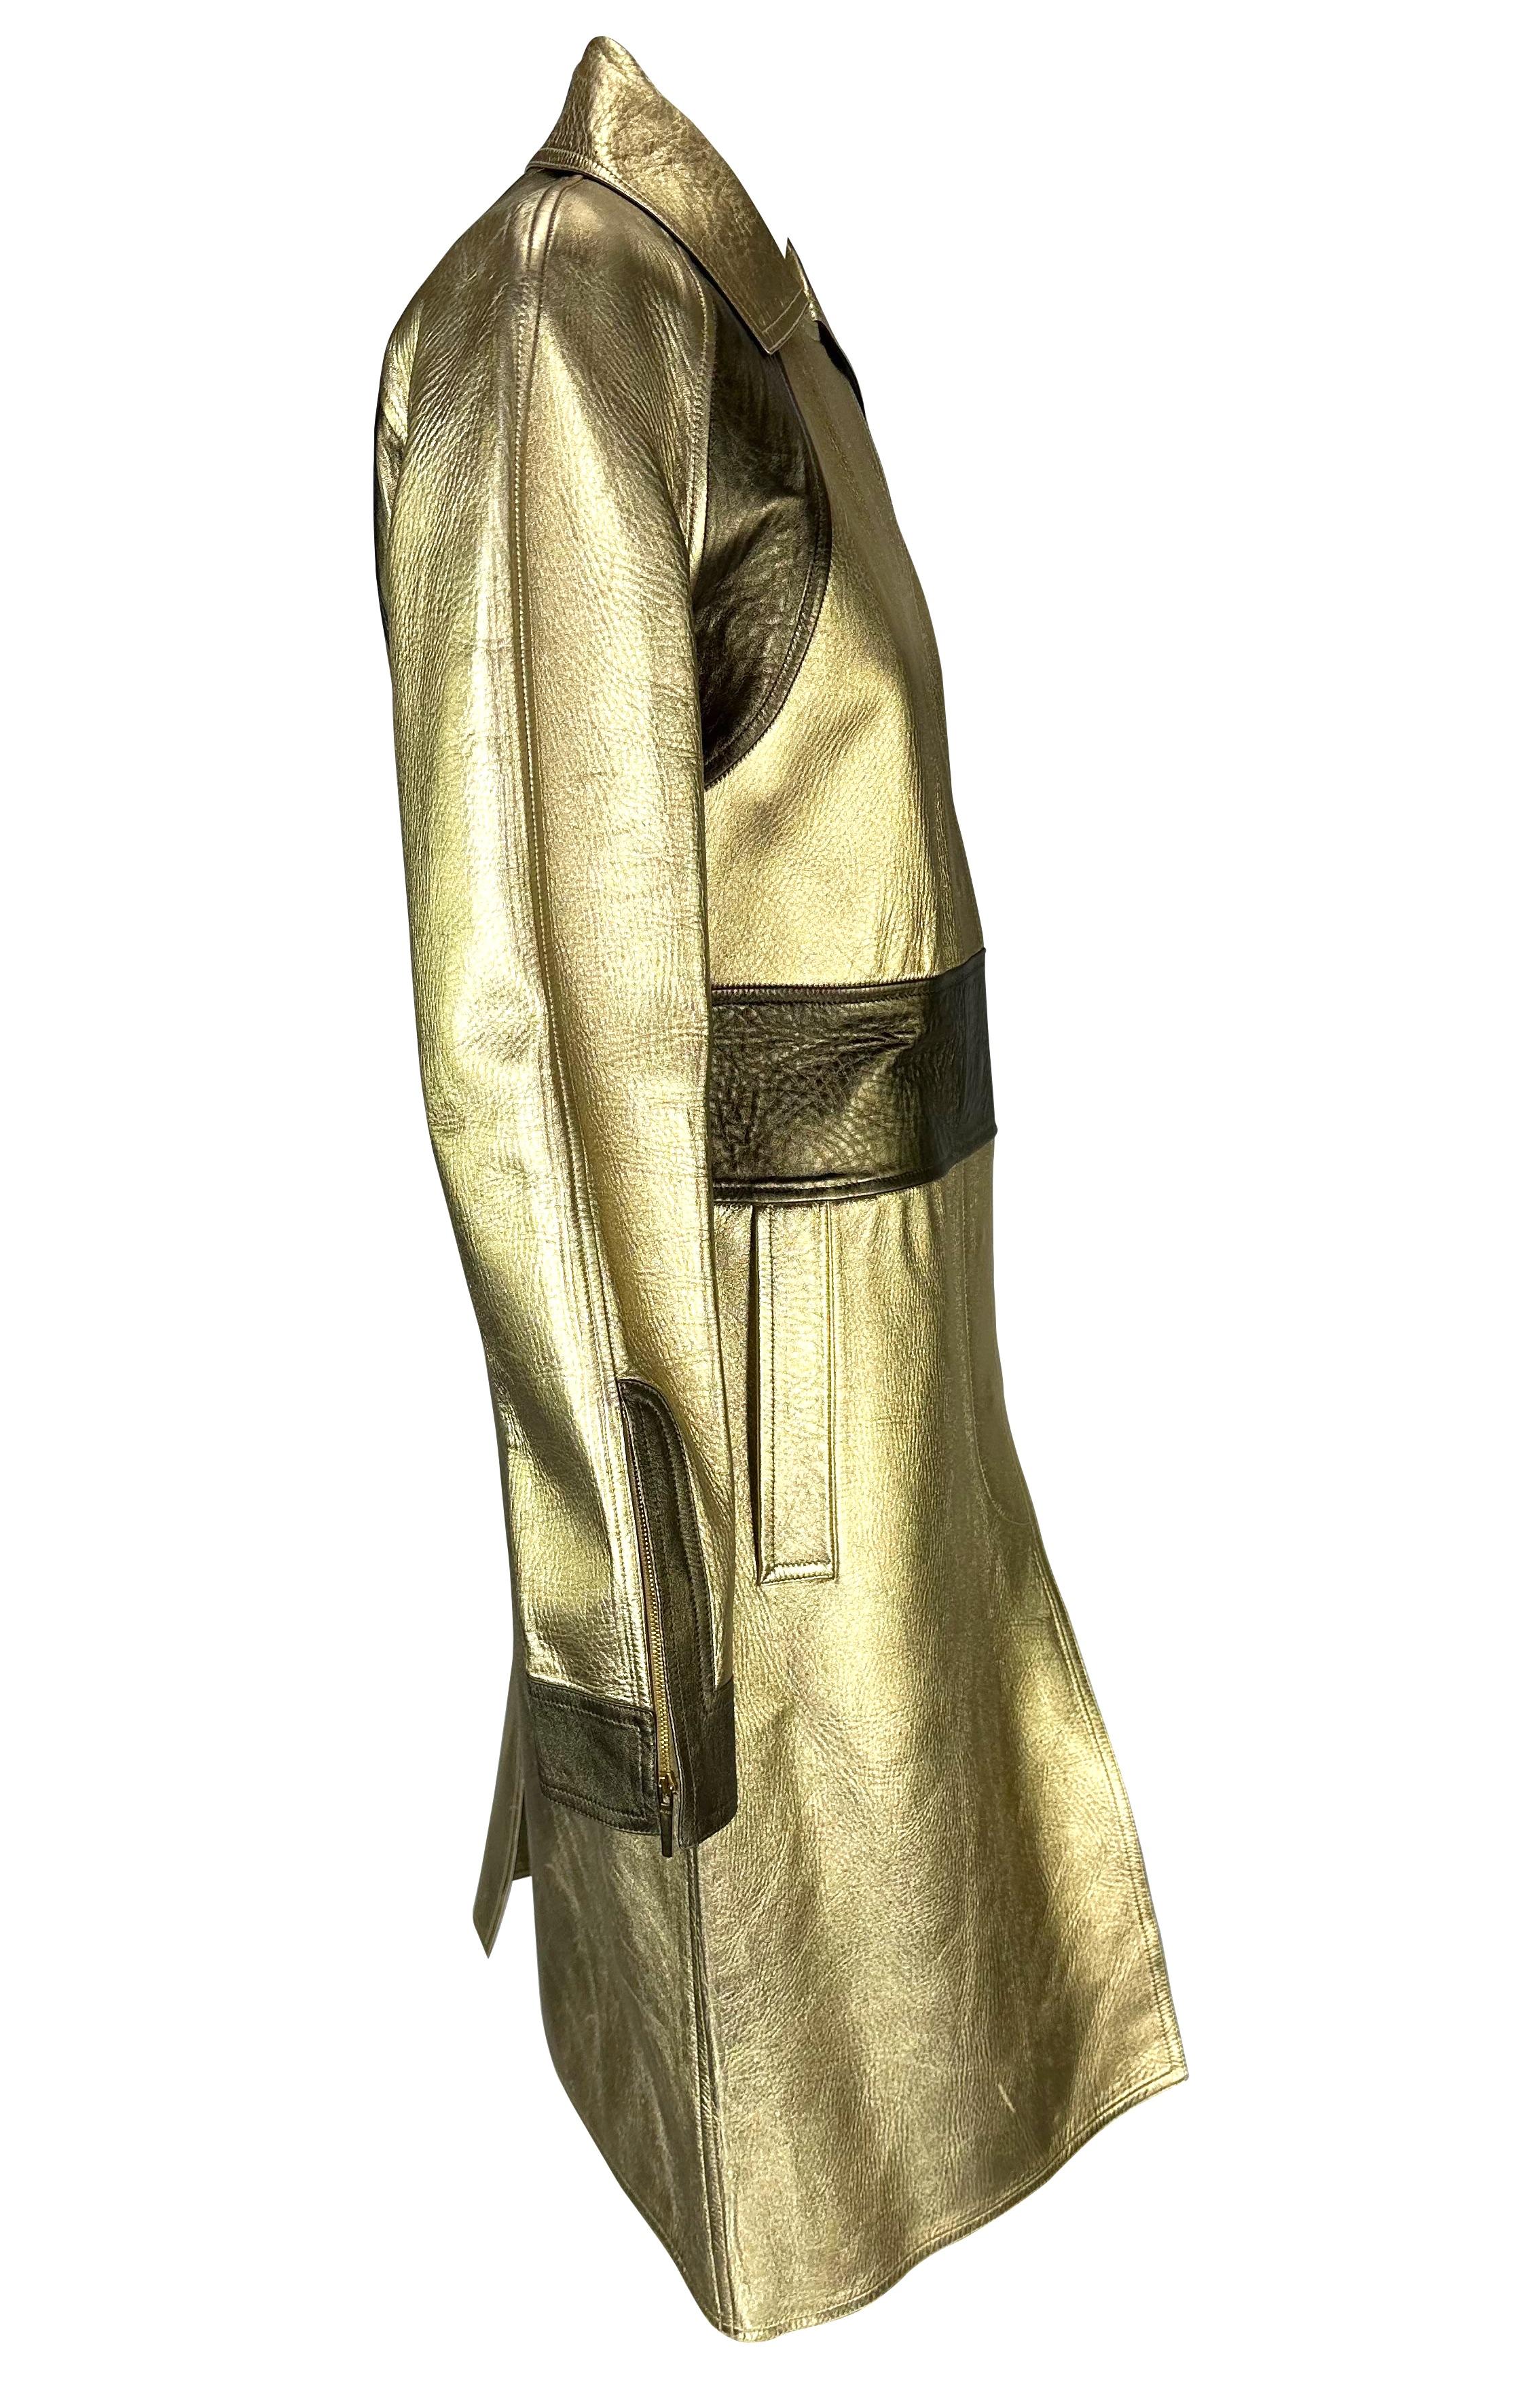 Women's F/W 2000 Gucci by Tom Ford Runway Ad Two-Tone Gold Metallic Leather Coat